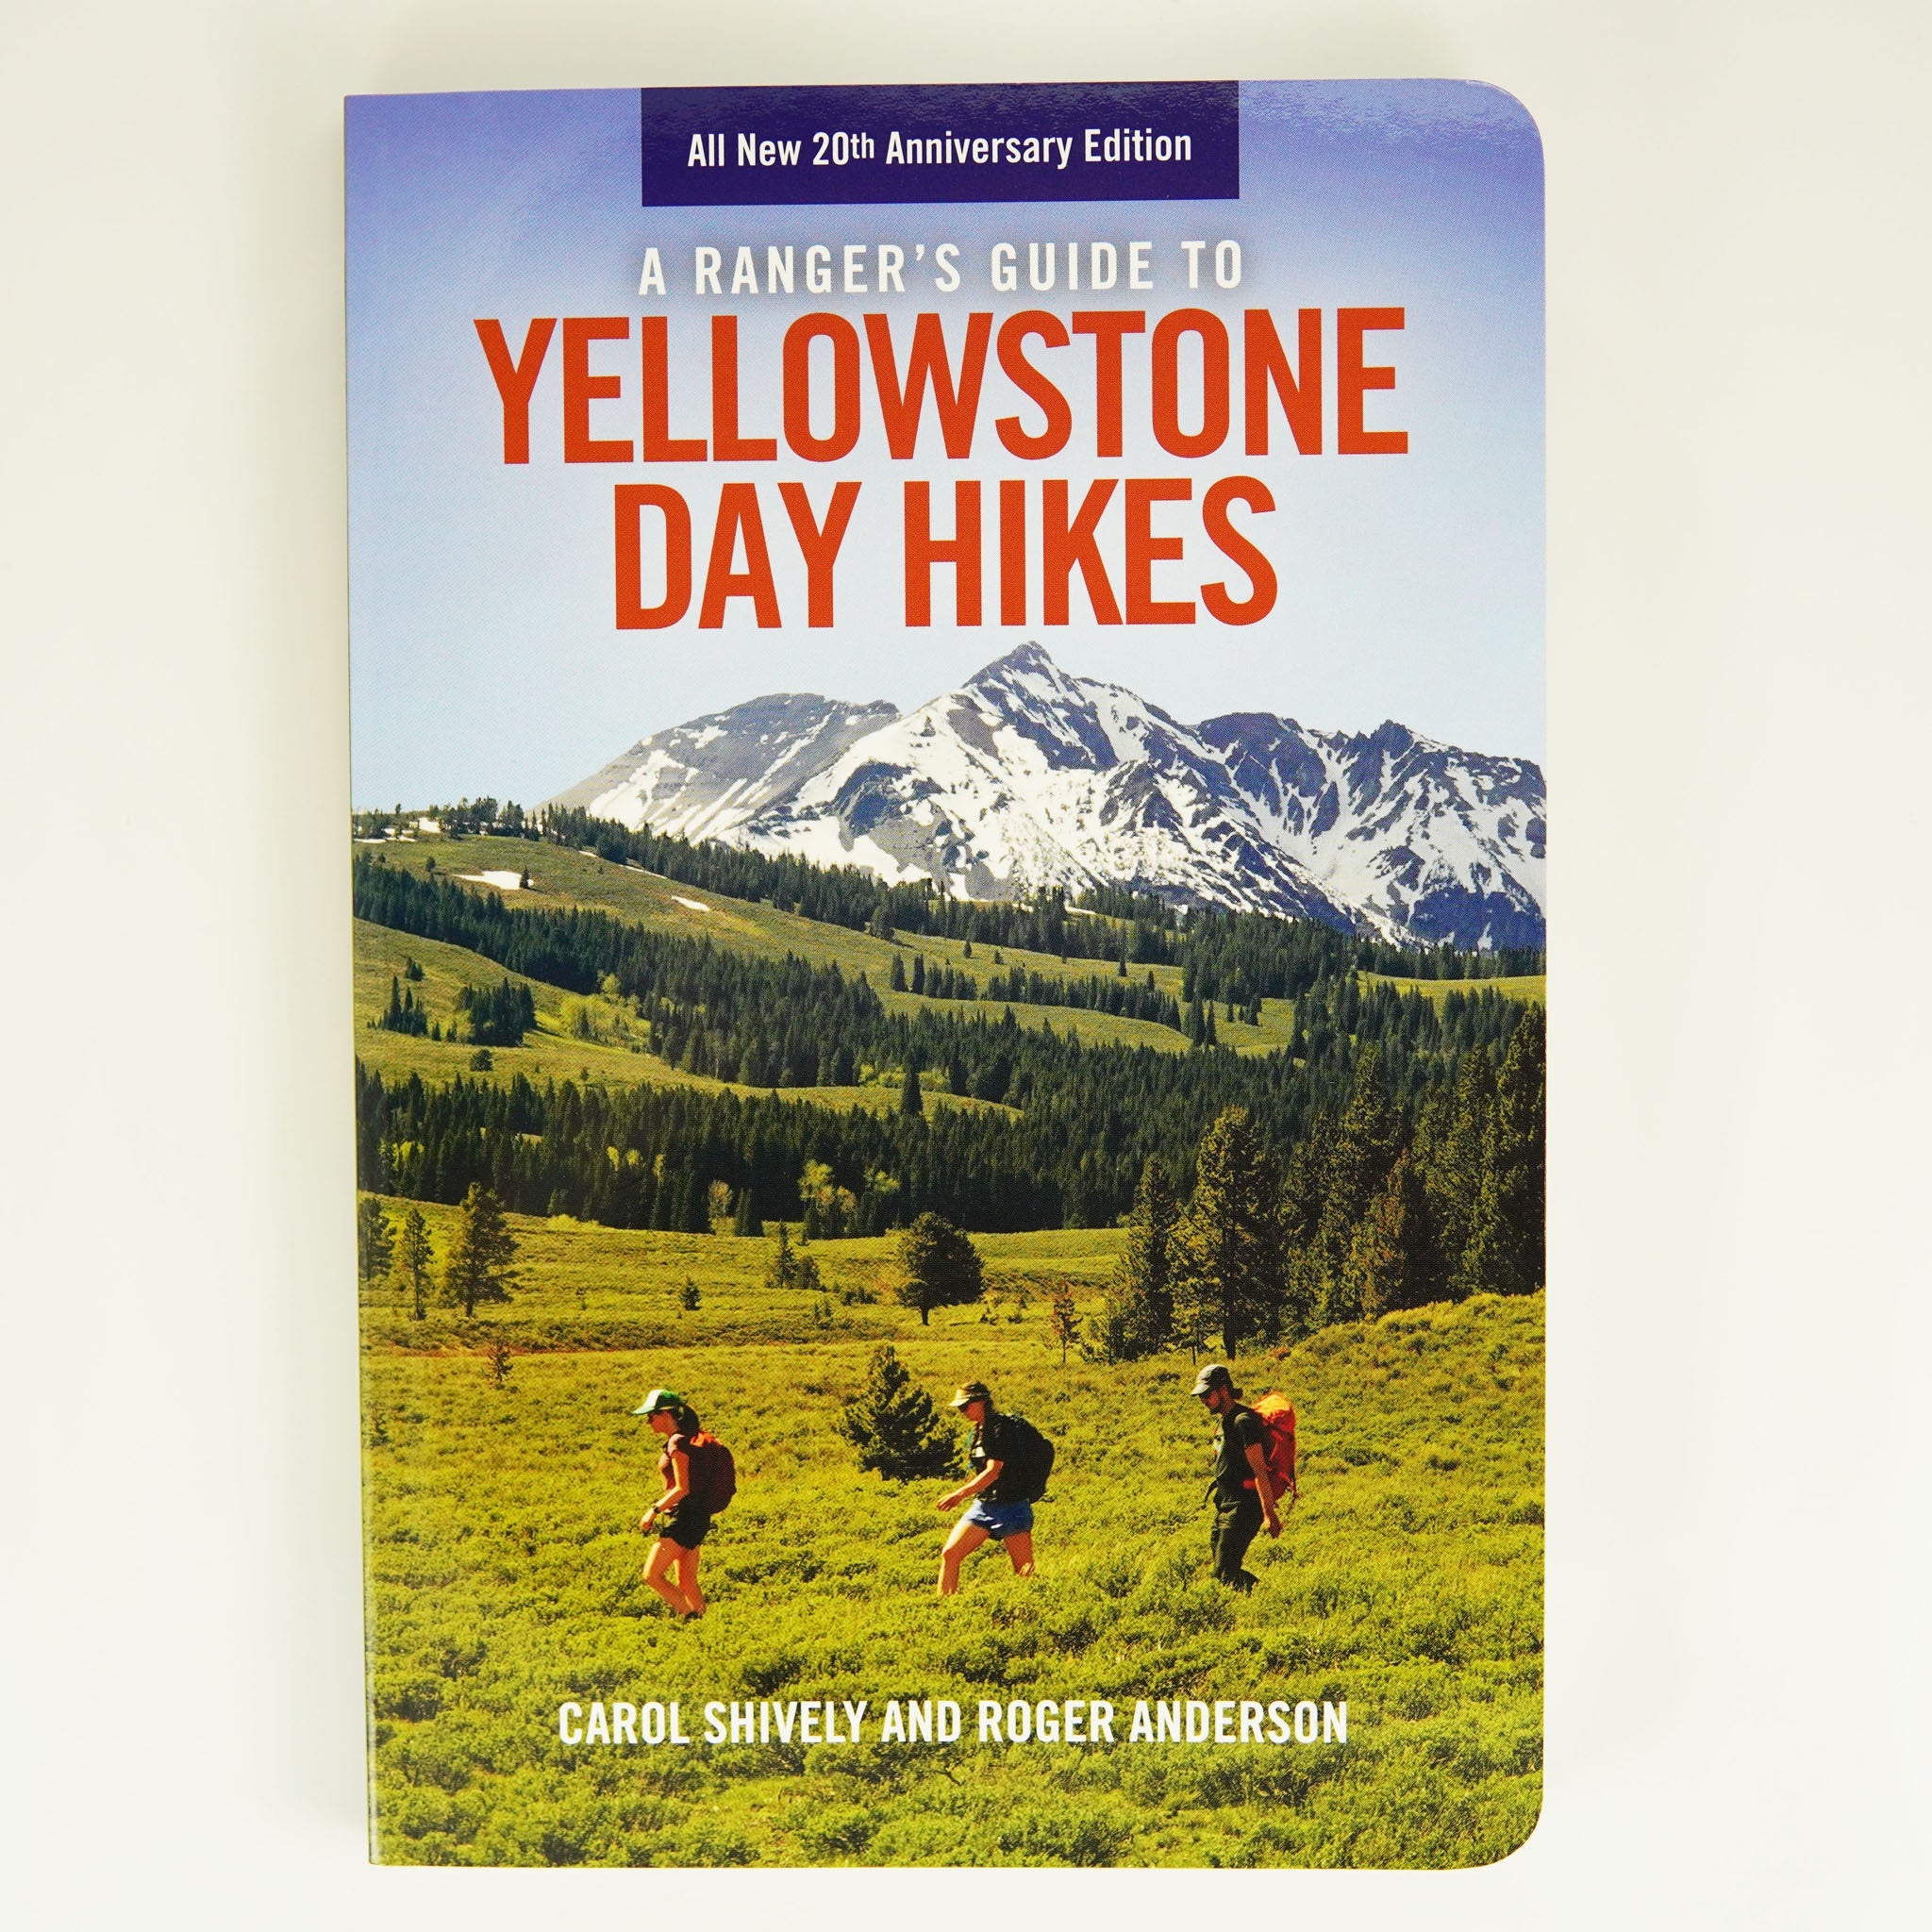 BK 10 A RANGER'S GUIDE YELLOWSTONE DAY HIKES BY C. SHIVELY, R. ANDERSON #13303 D2 MAY23